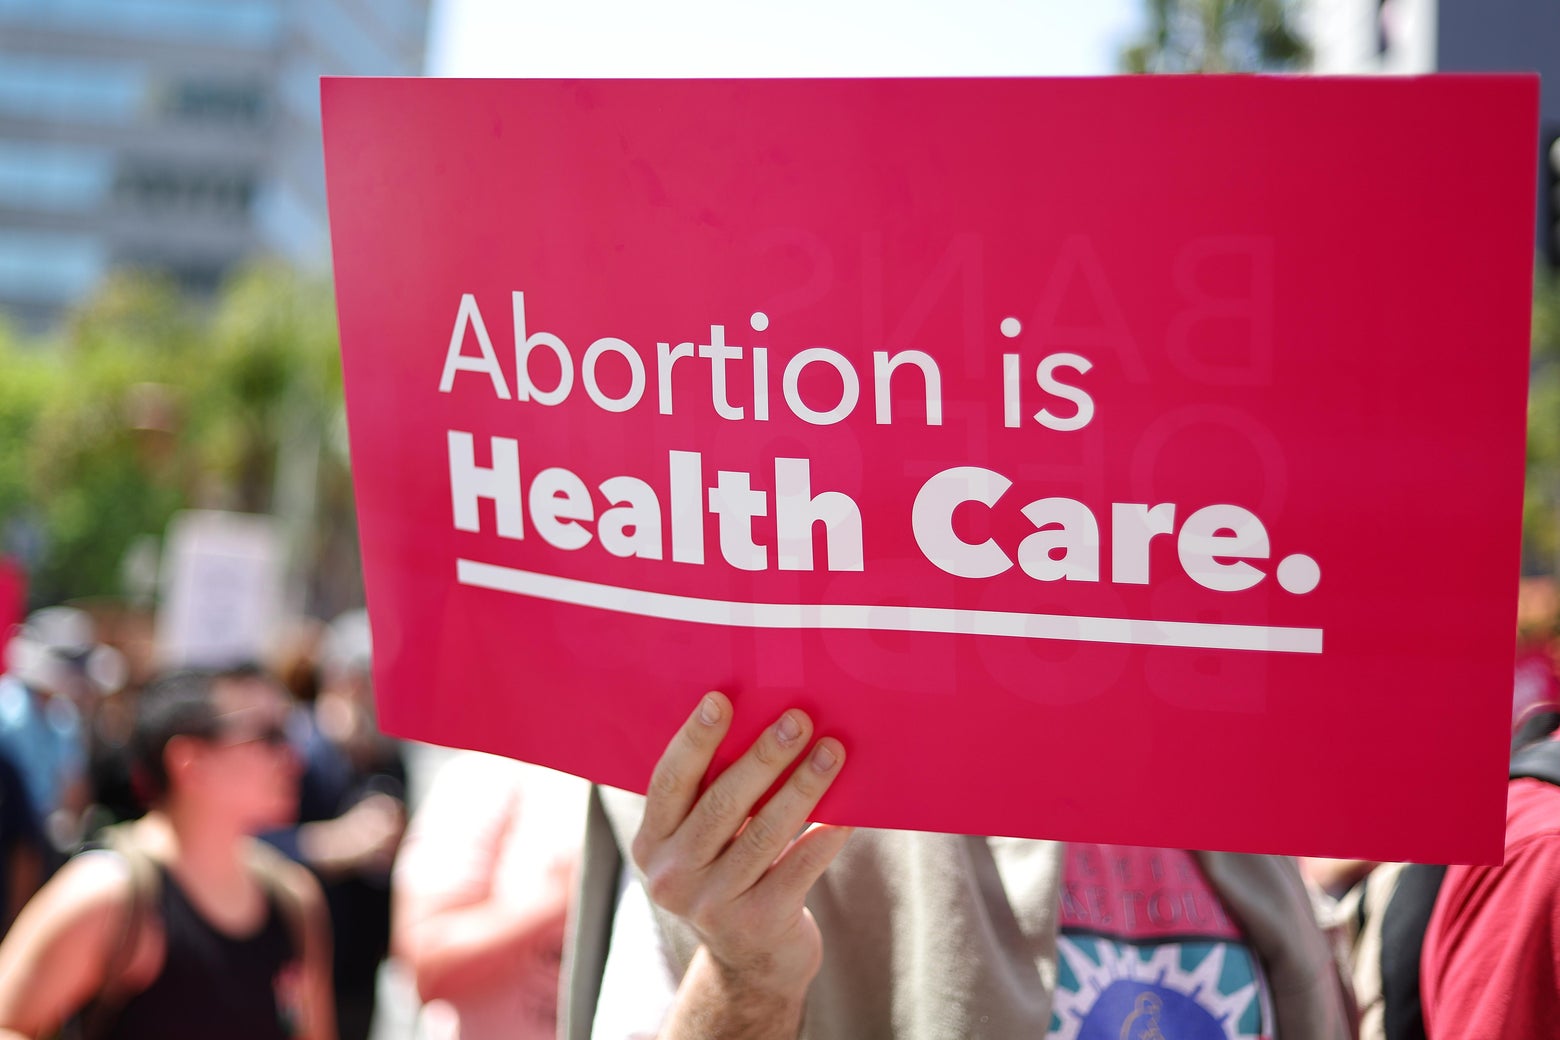 Oklahoma Supreme Court’s Abortion Ruling Shows Path Forward in Deep Red States